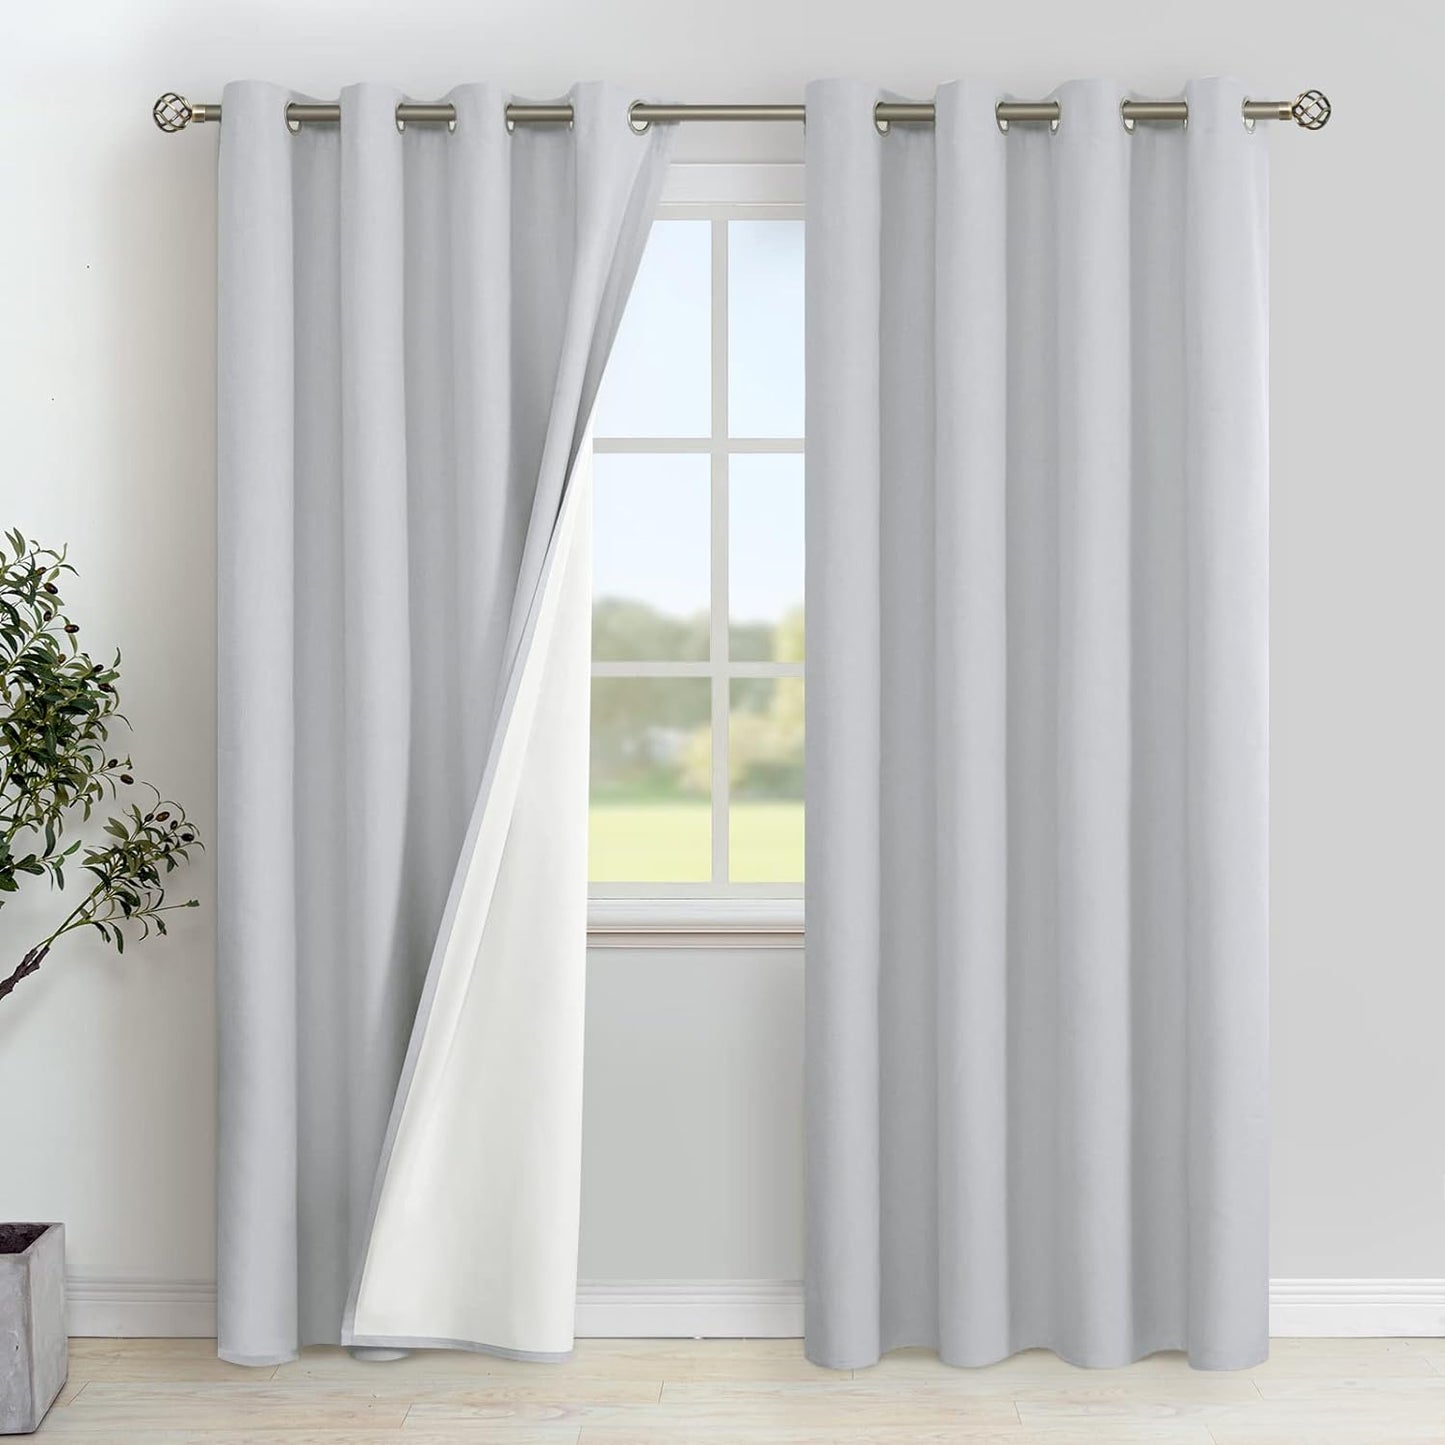 Youngstex Linen Blackout Curtains 63 Inches Long, Grommet Full Room Darkening Linen Window Drapes Thermal Insulated for Living Room Bedroom, 2 Panels, 52 X 63 Inch, Linen  YoungsTex Light Grey 52W X 84L 